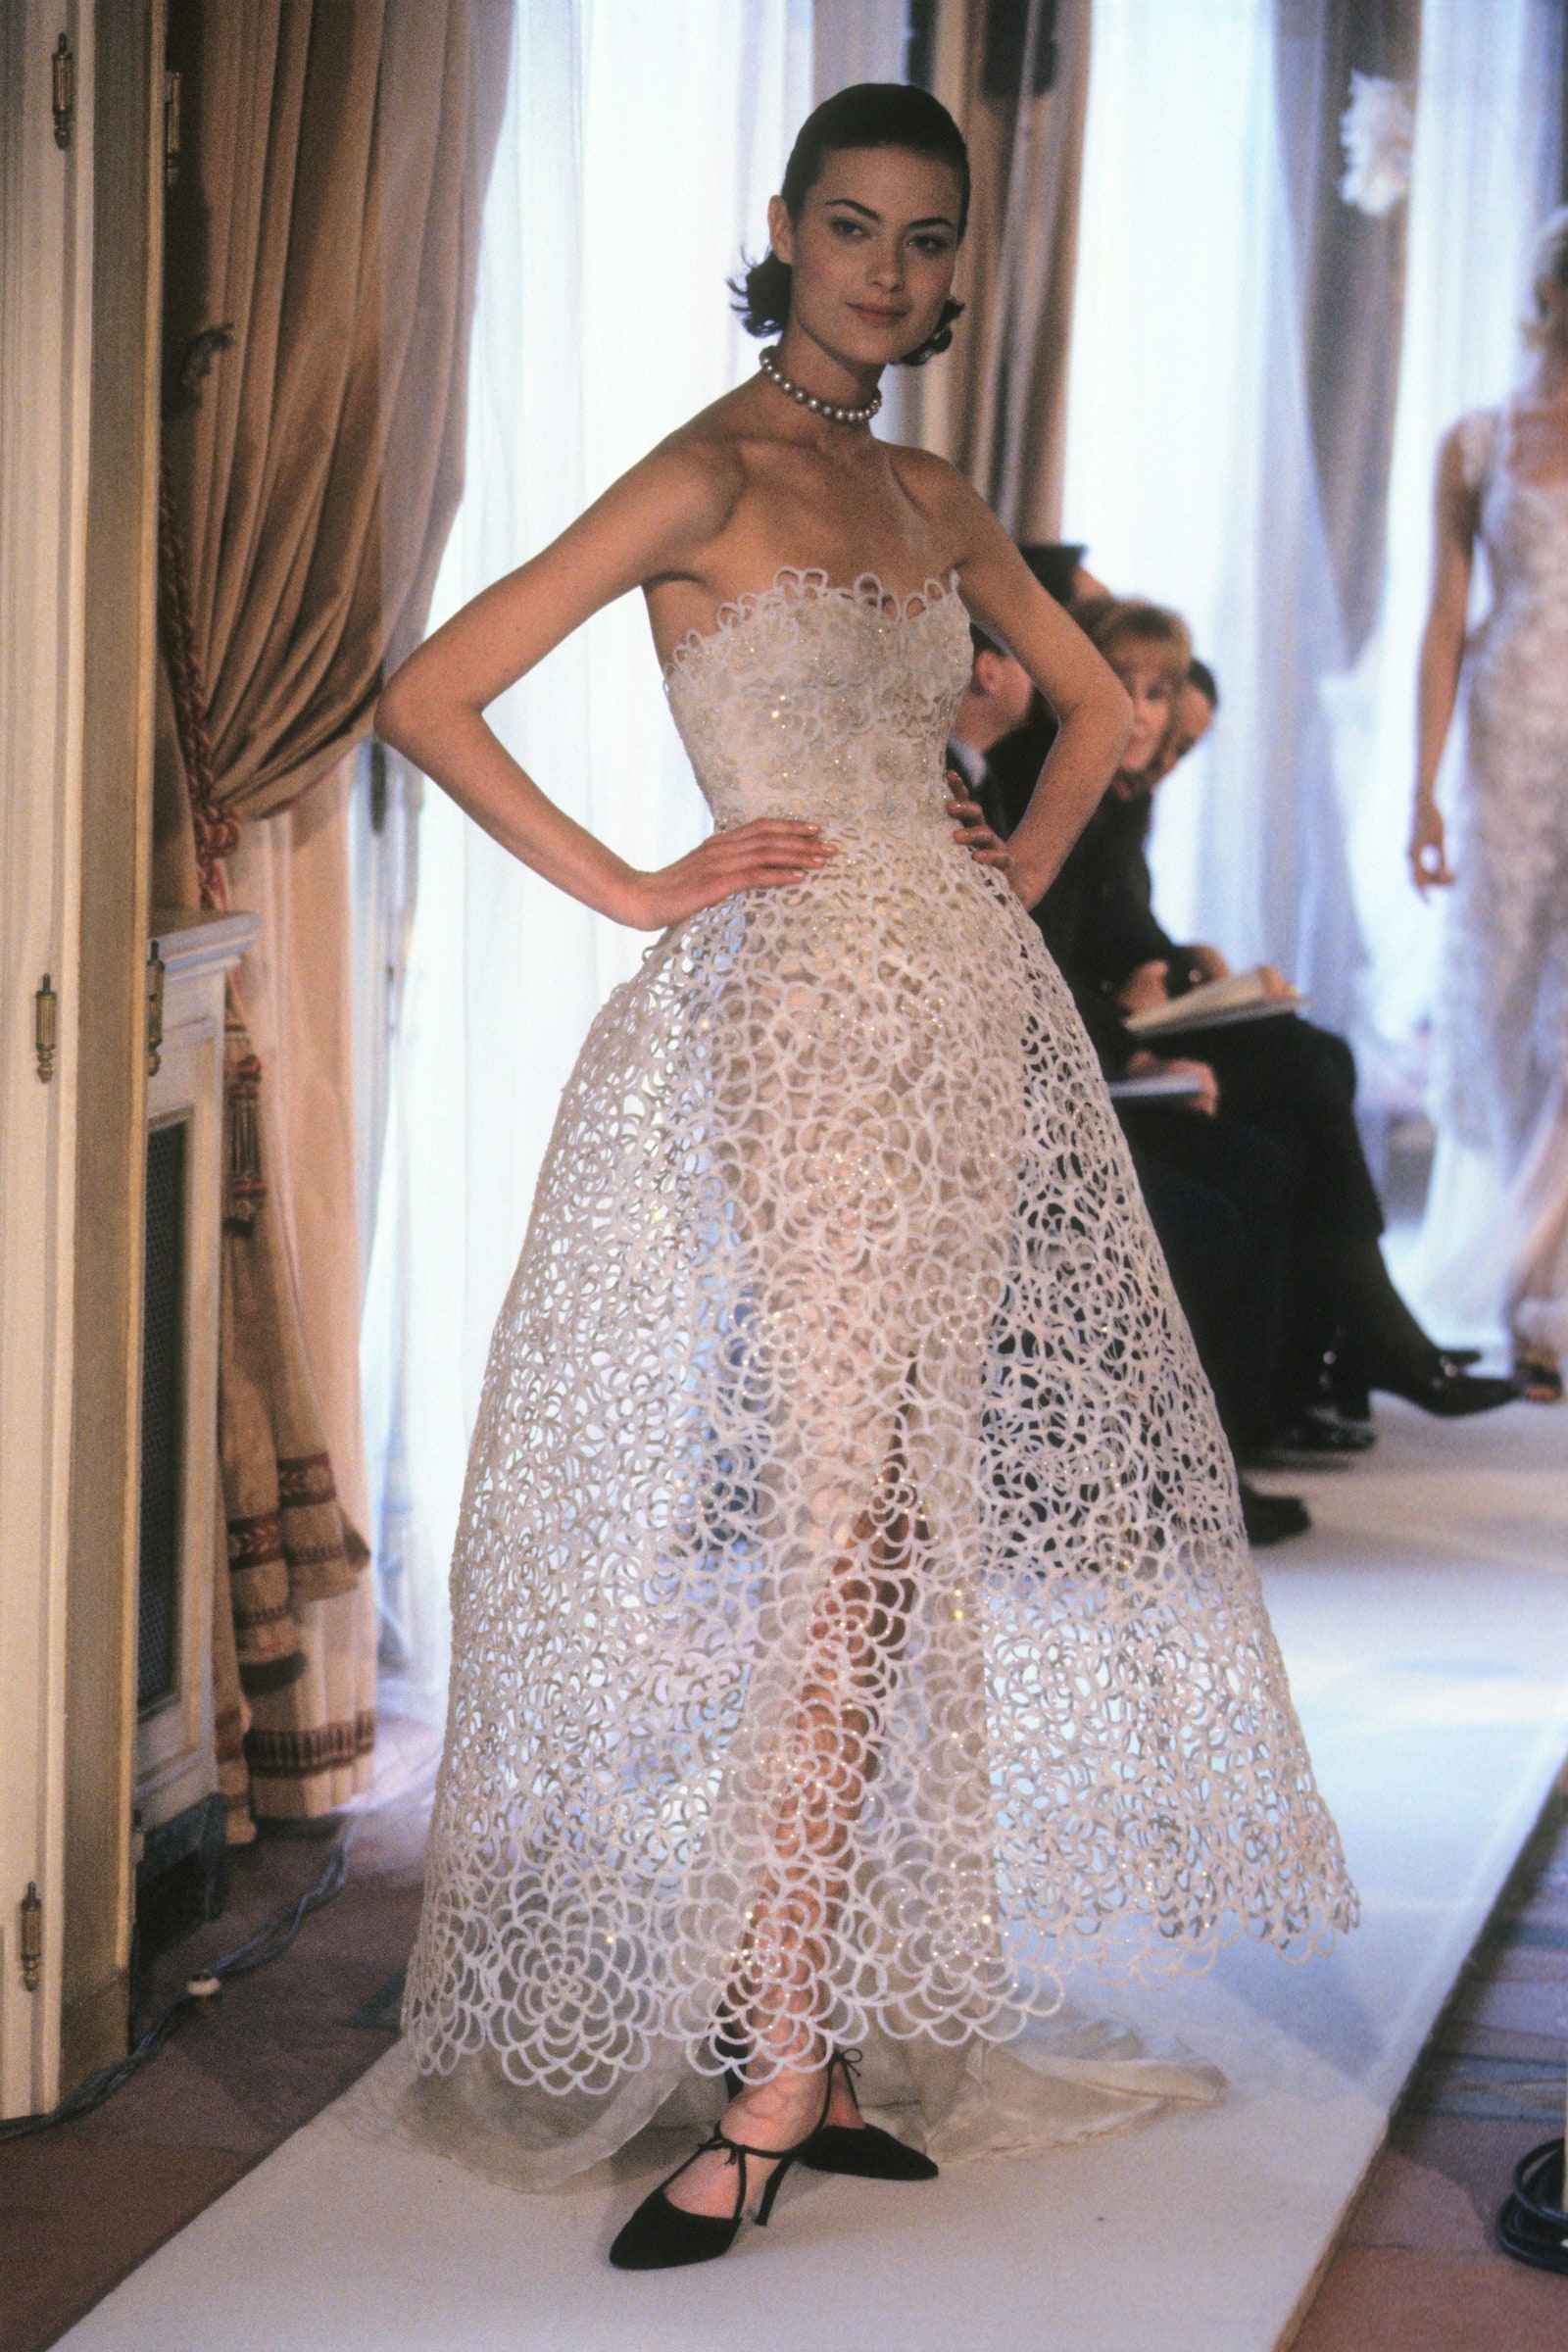 Take Inspiration from Chanel's Couture Brides Throughout History